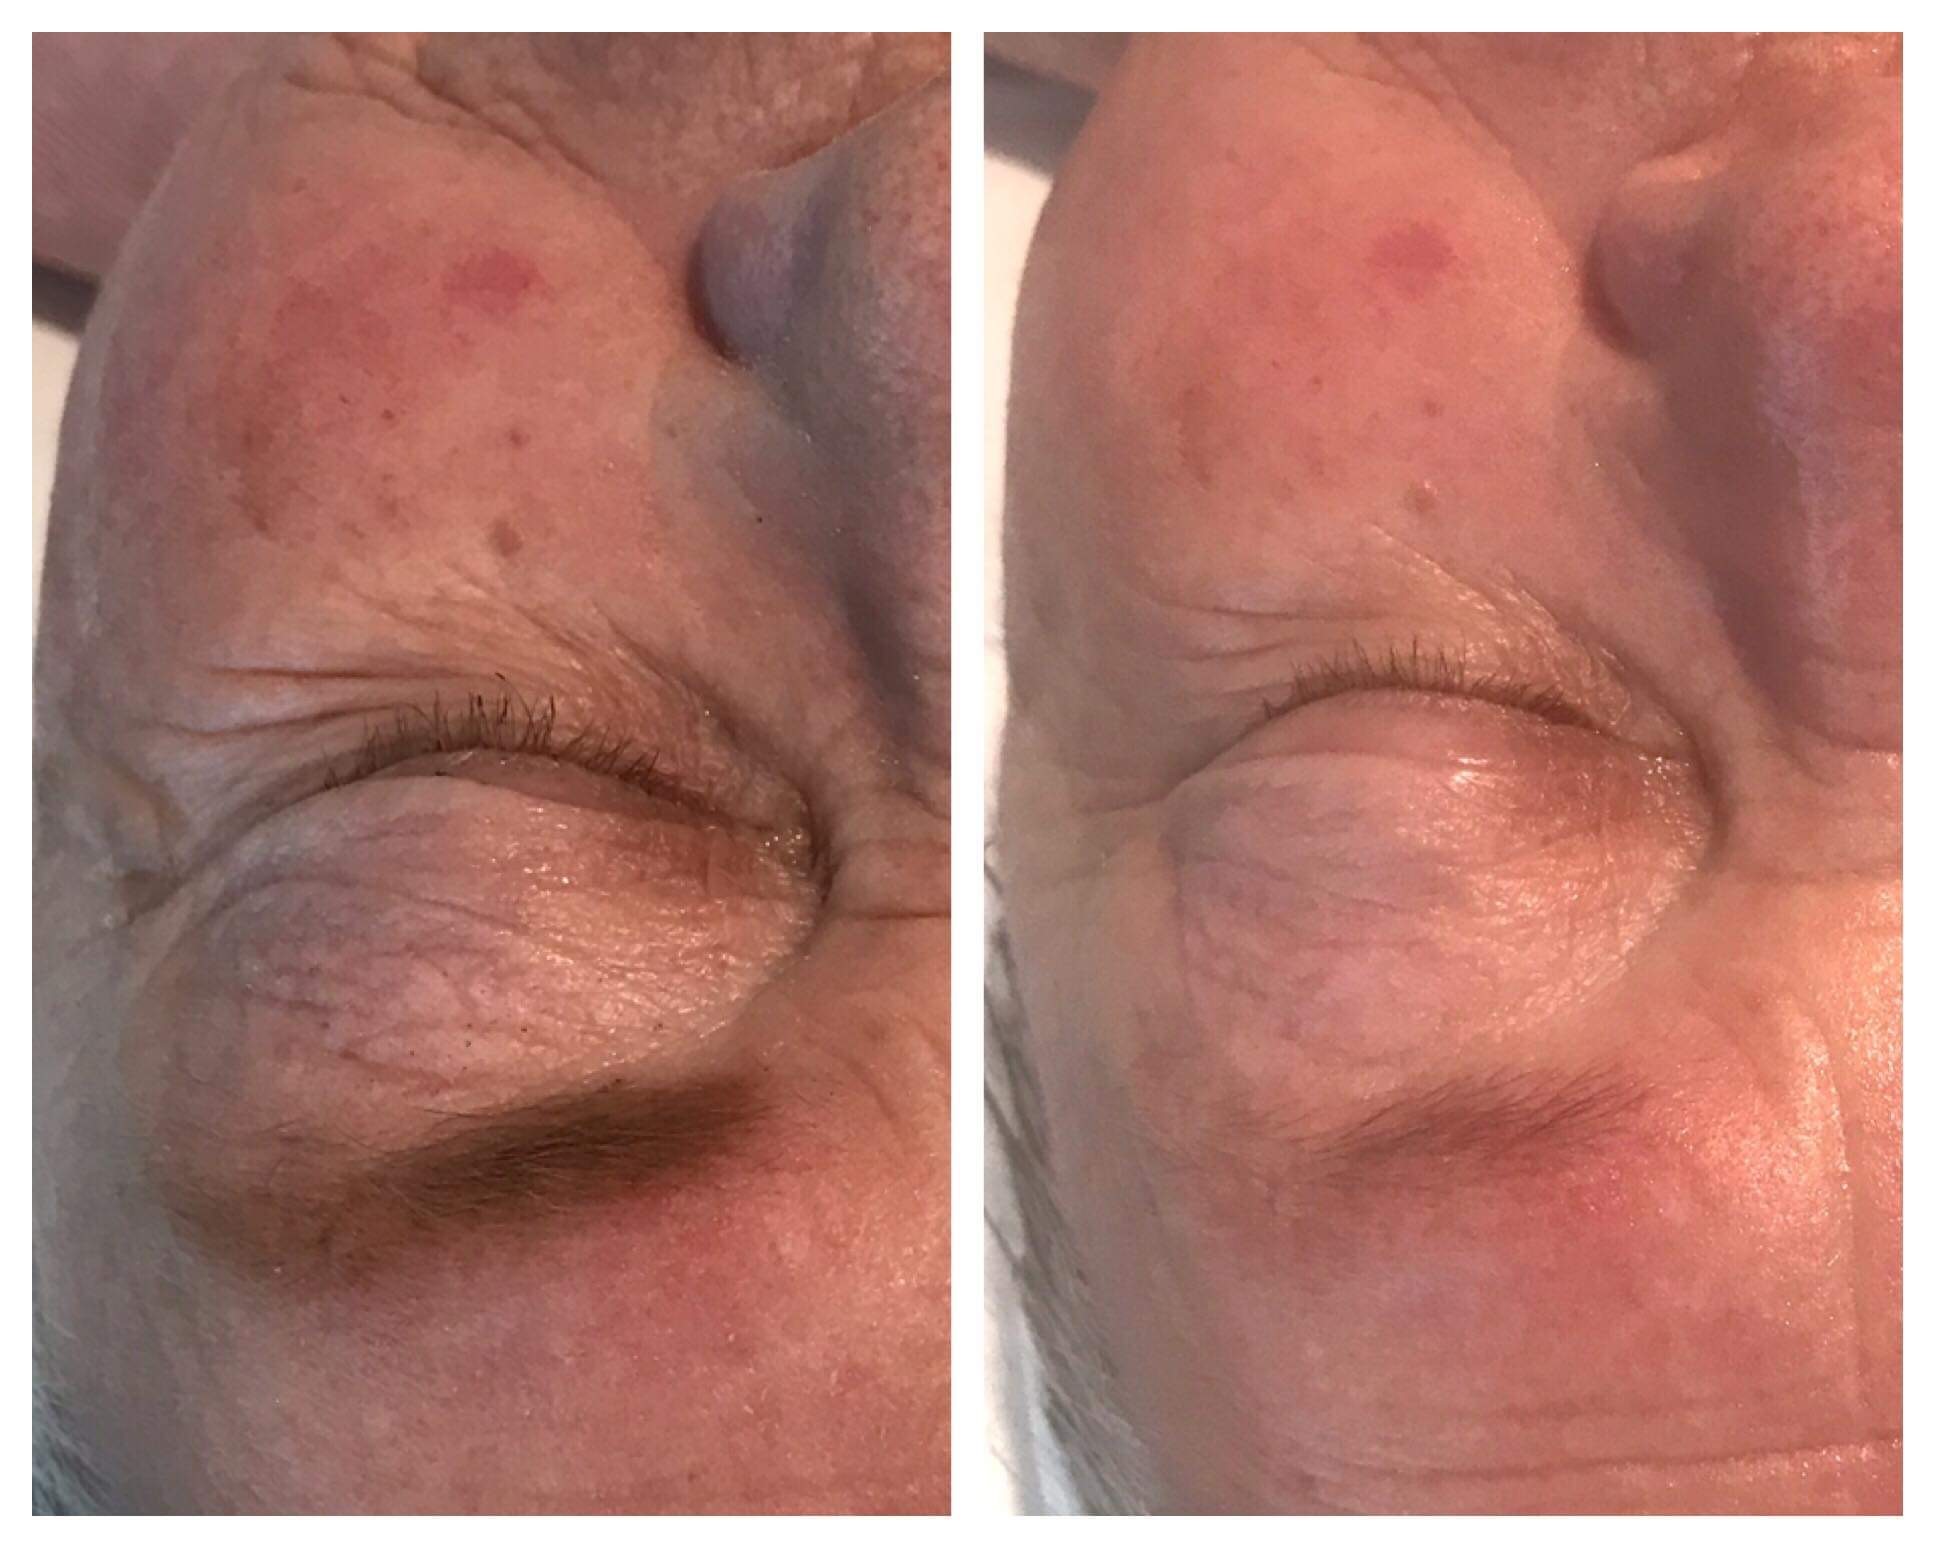 Before and After Nano Needling. Reduction in skin pigmenation.